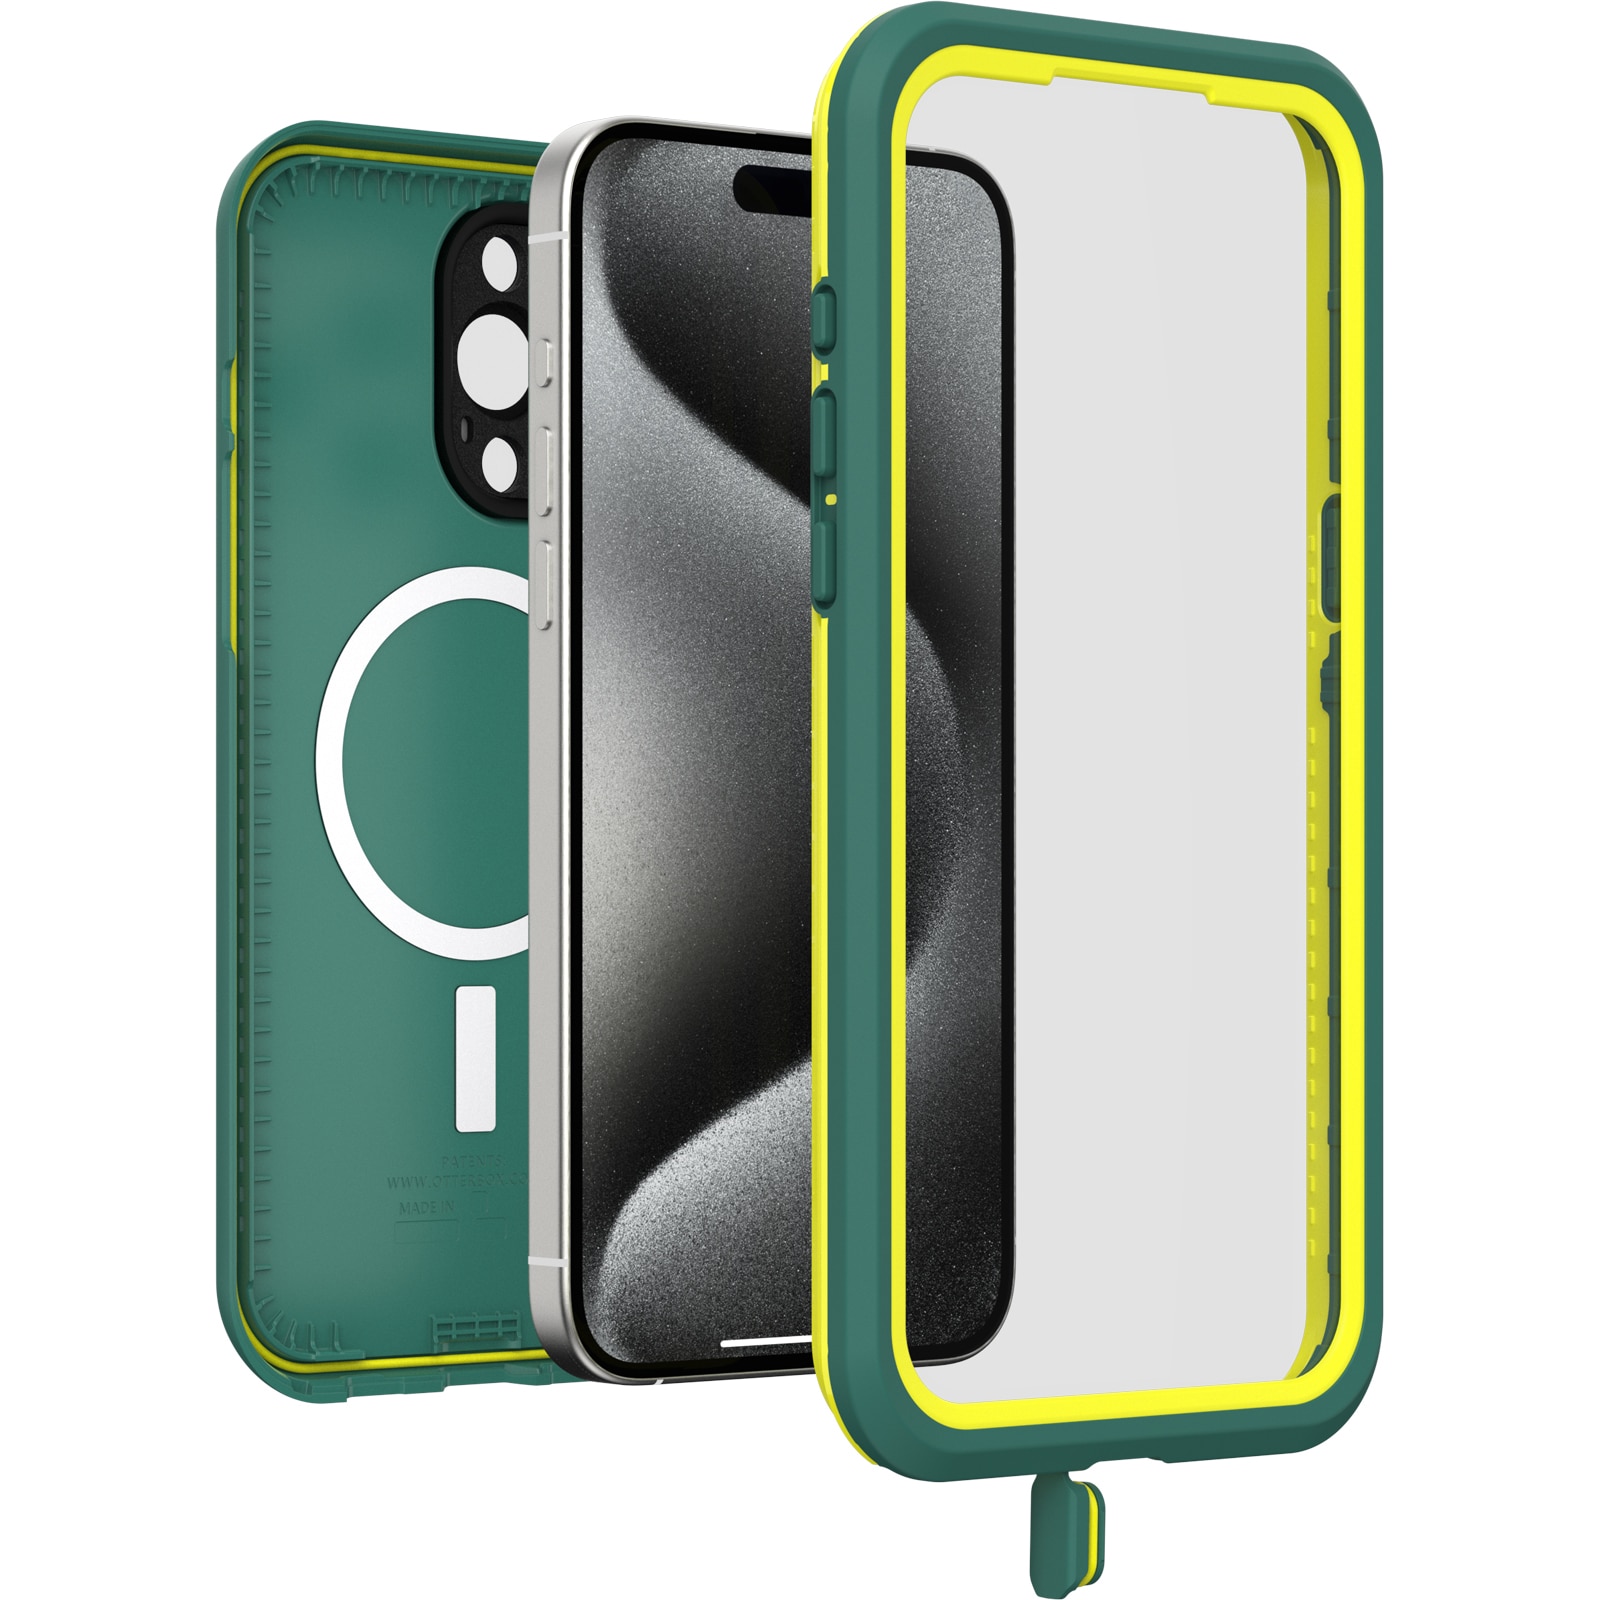 FRE MagSafe Coque iPhone 15 Pro Max Green